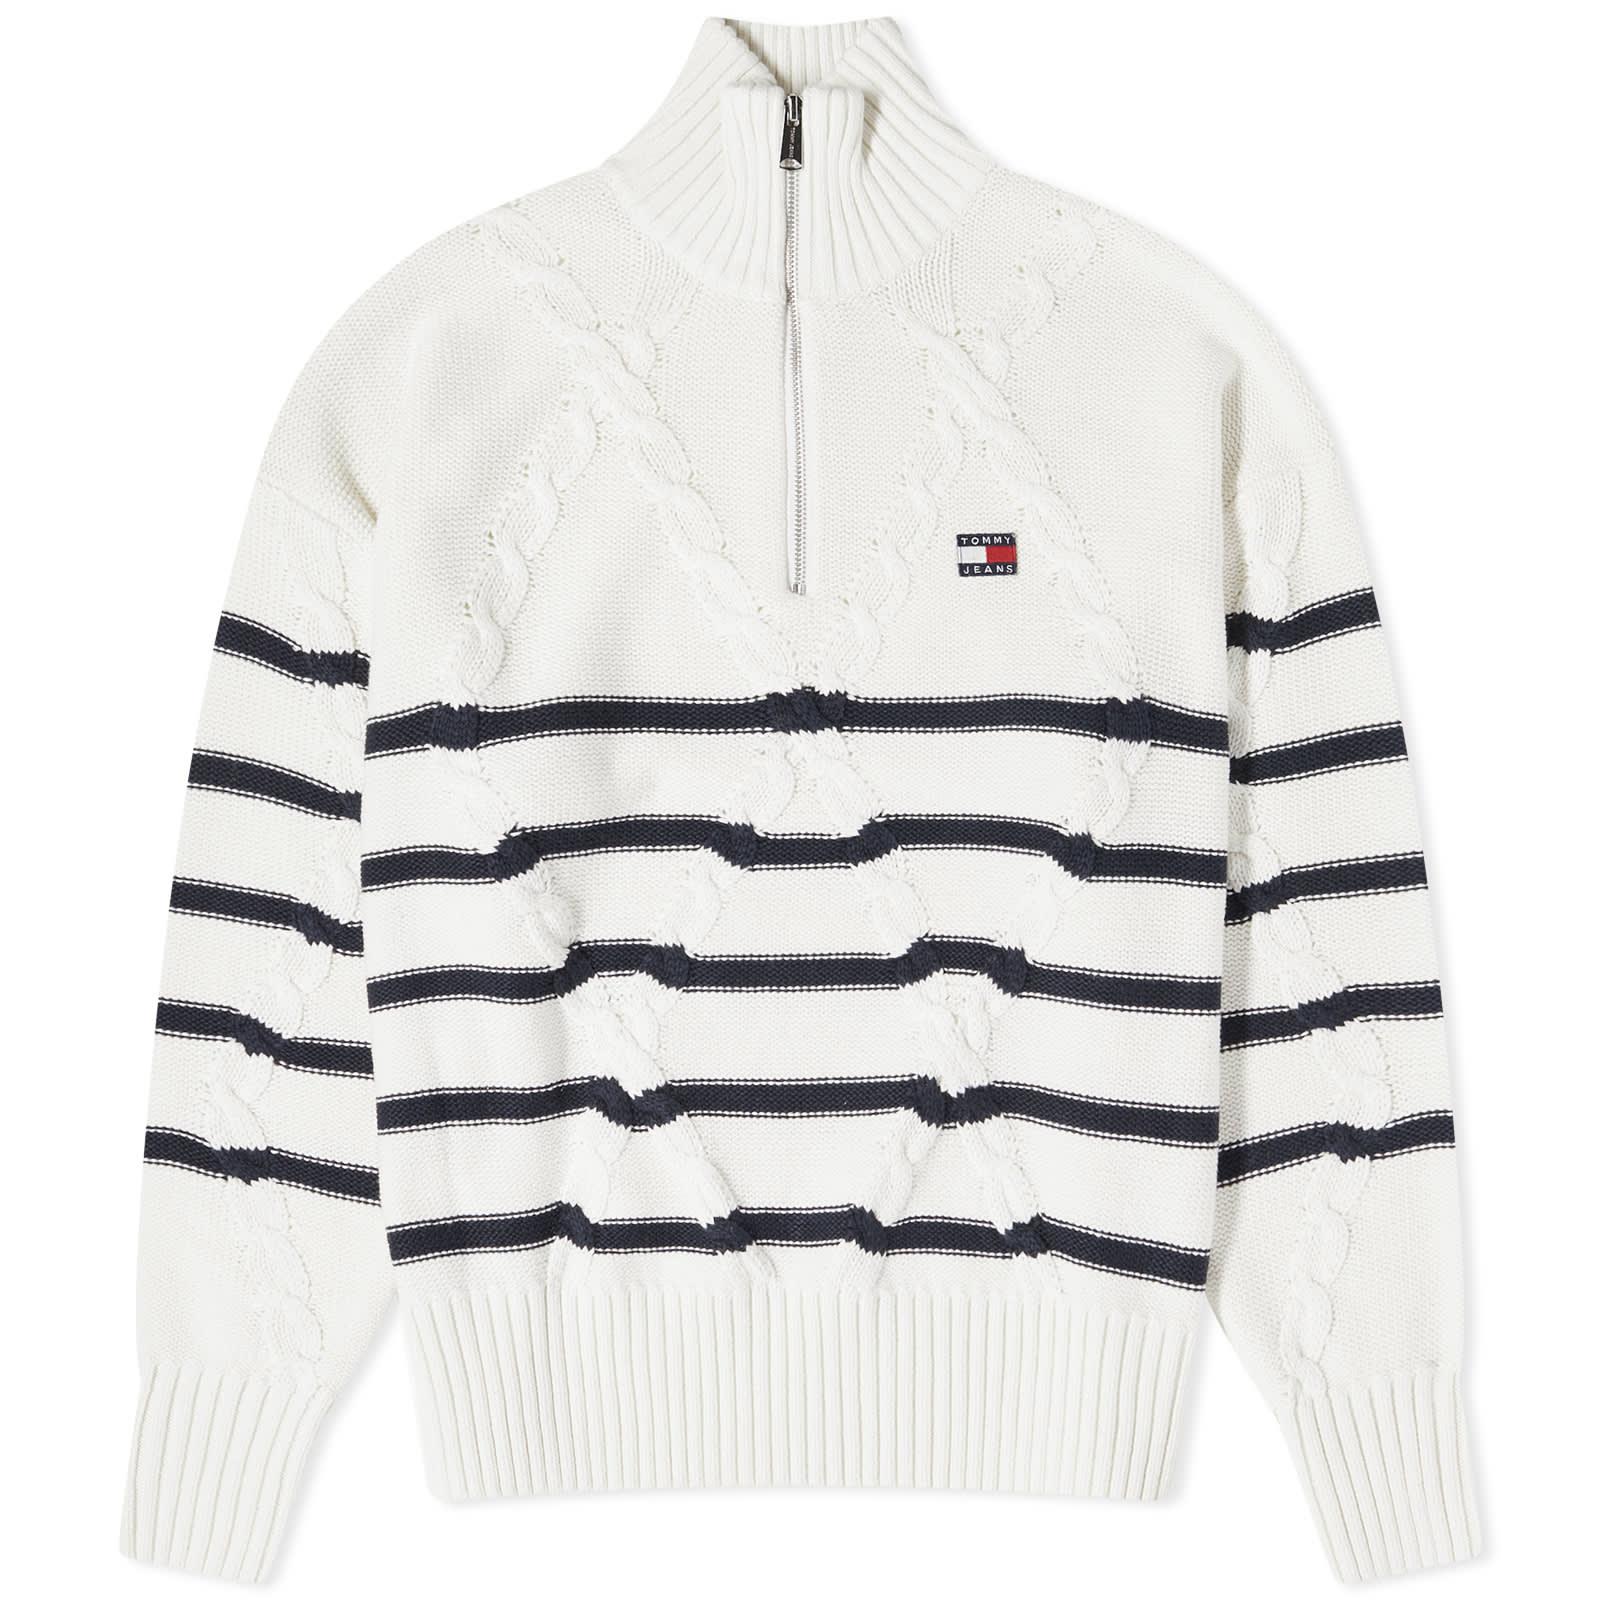 Tommy Hilfiger CABLE ALL OVER SWEATER - Jumper - iconic pink/pink